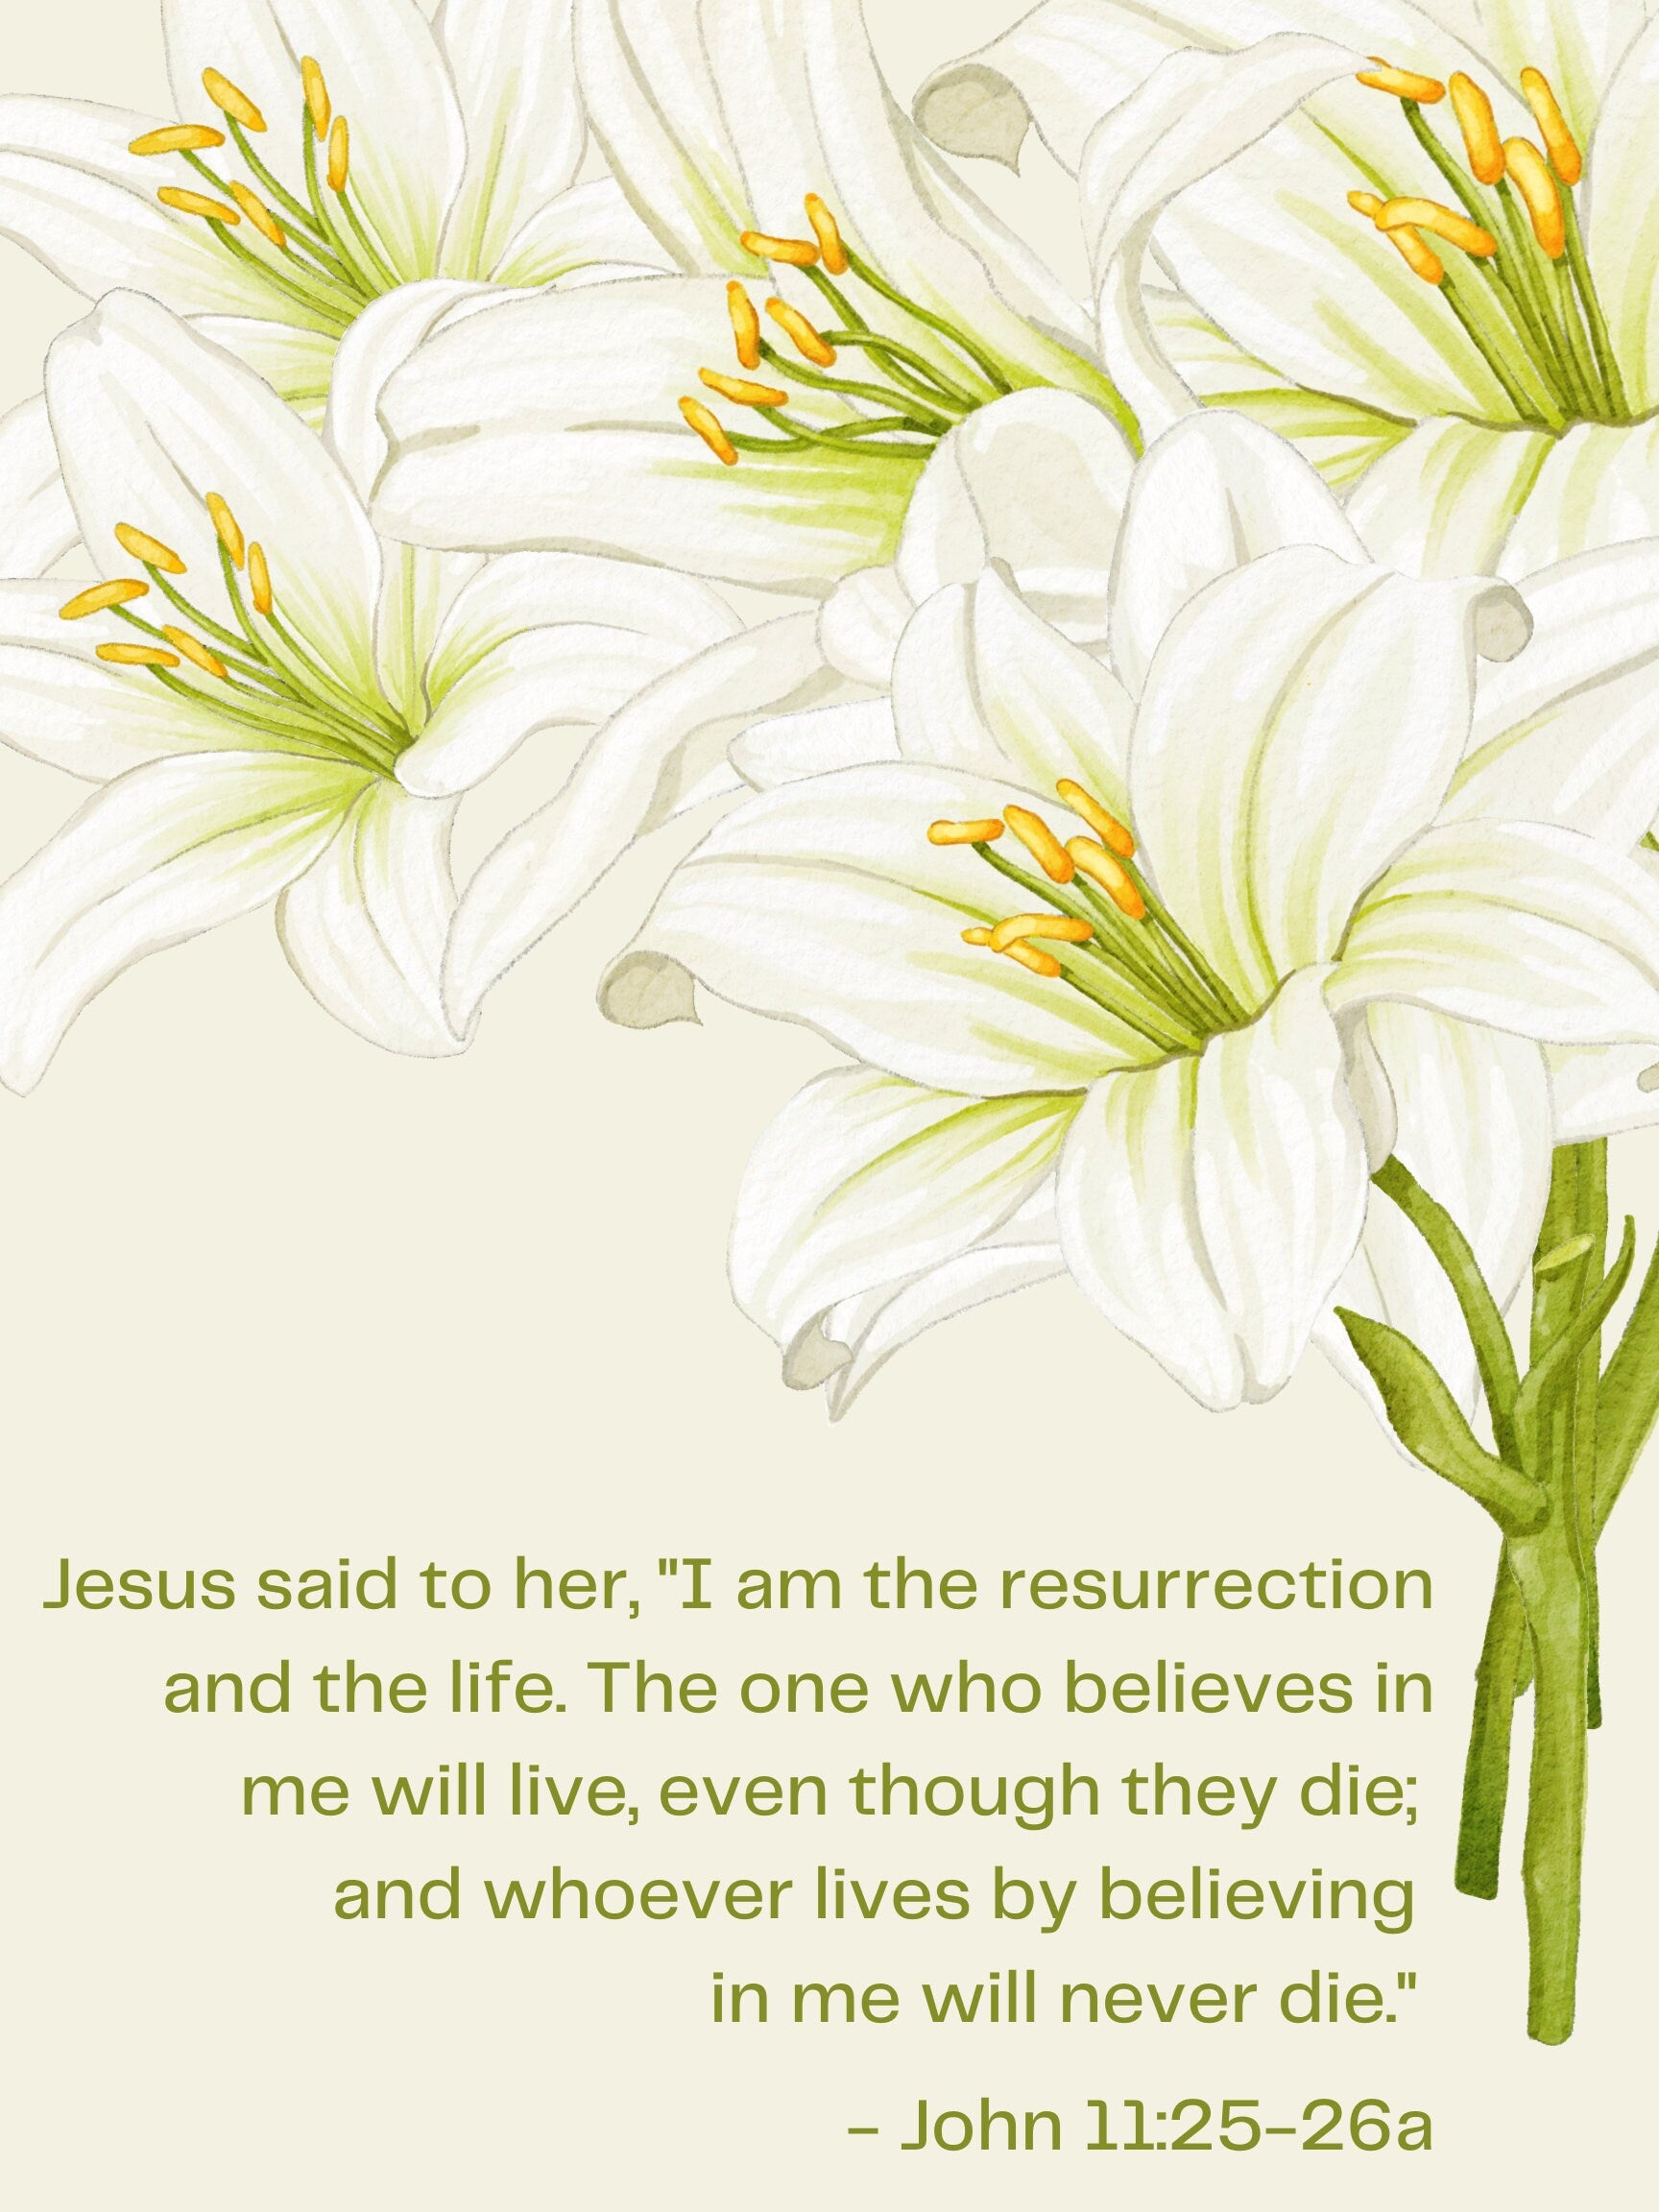 Easter Greeting Cards - Religious - Digital Download